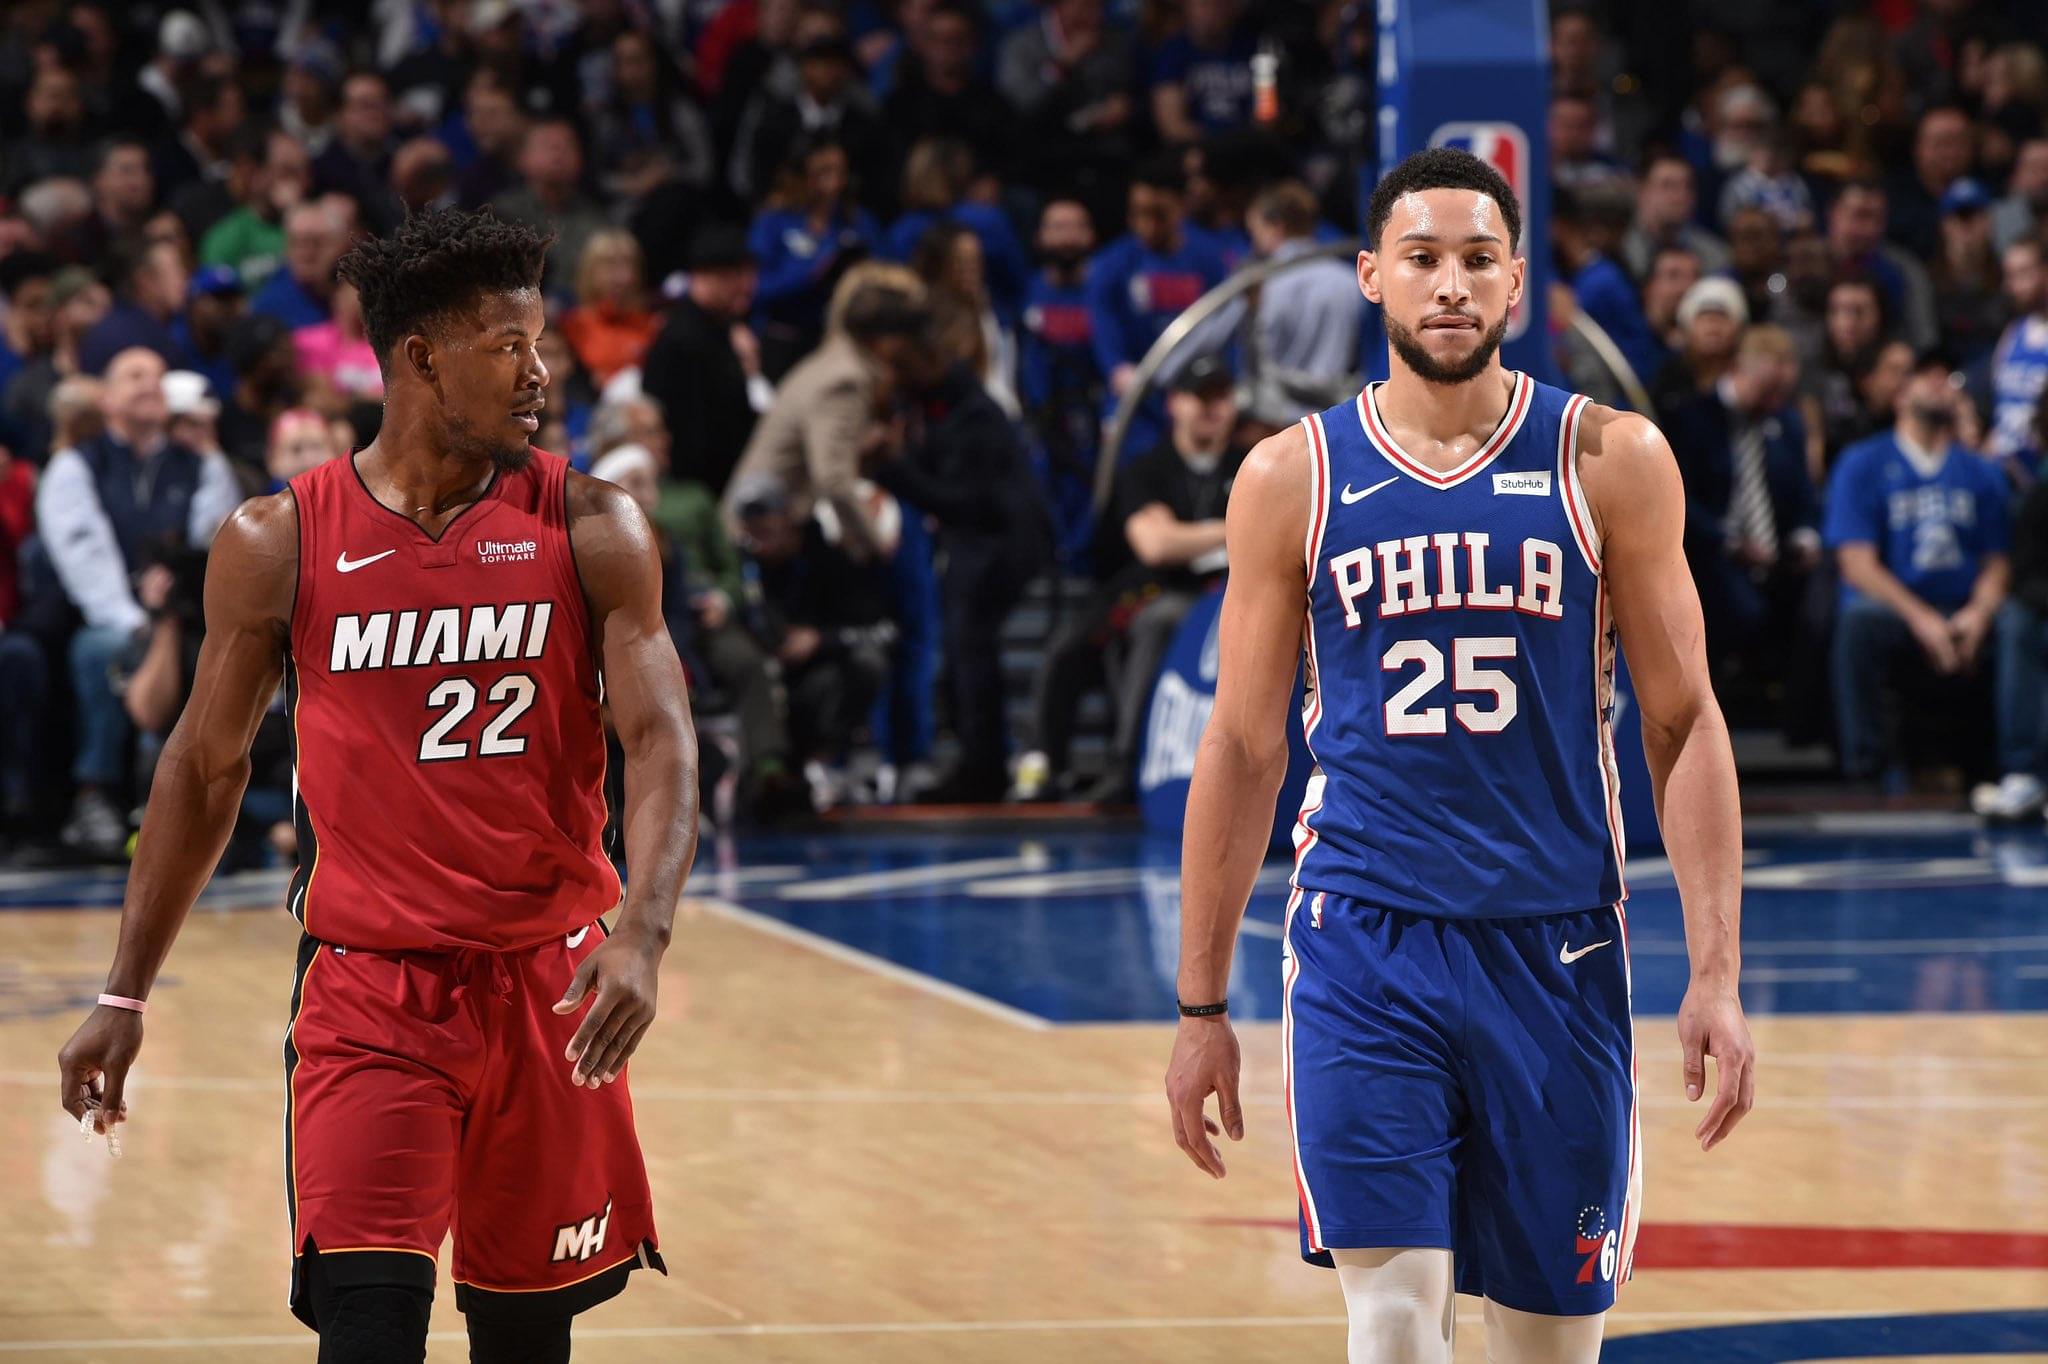 "Jimmy Butler has shown more heart this game than Ben in his whole career": Sixers fans express their misery to the news of Philly choosing Simmons over Heat star